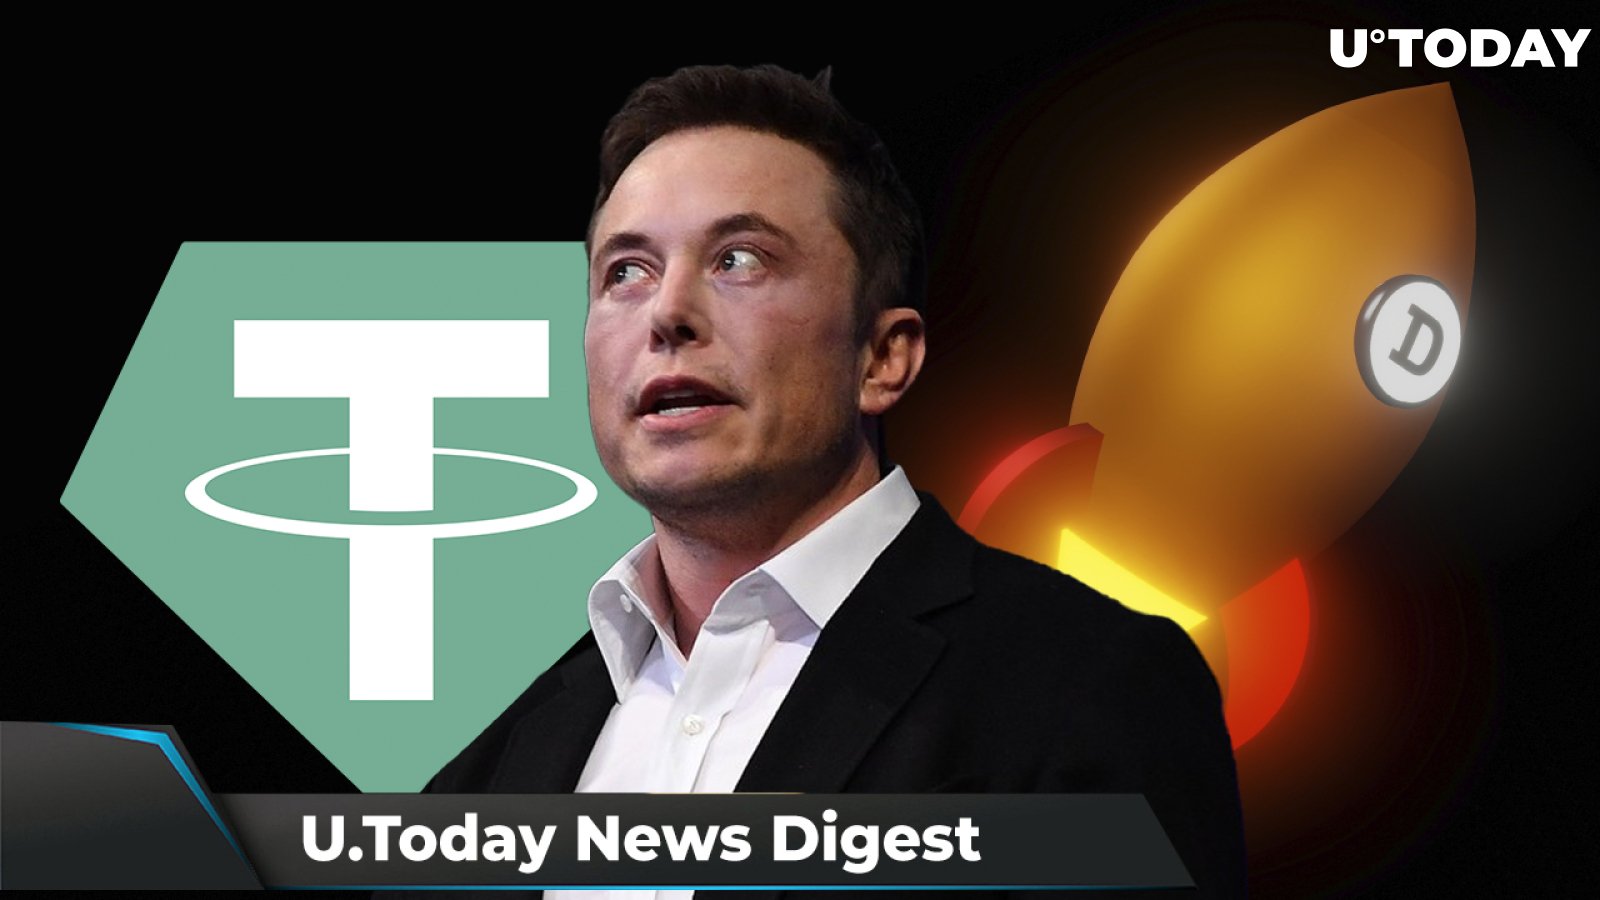 Elon Musk Makes DOGE Surge 28%, SHIB Listed by Bit2Me, Tether Slapped by New Class Action Lawsuit: Crypto News Digest by U.Today